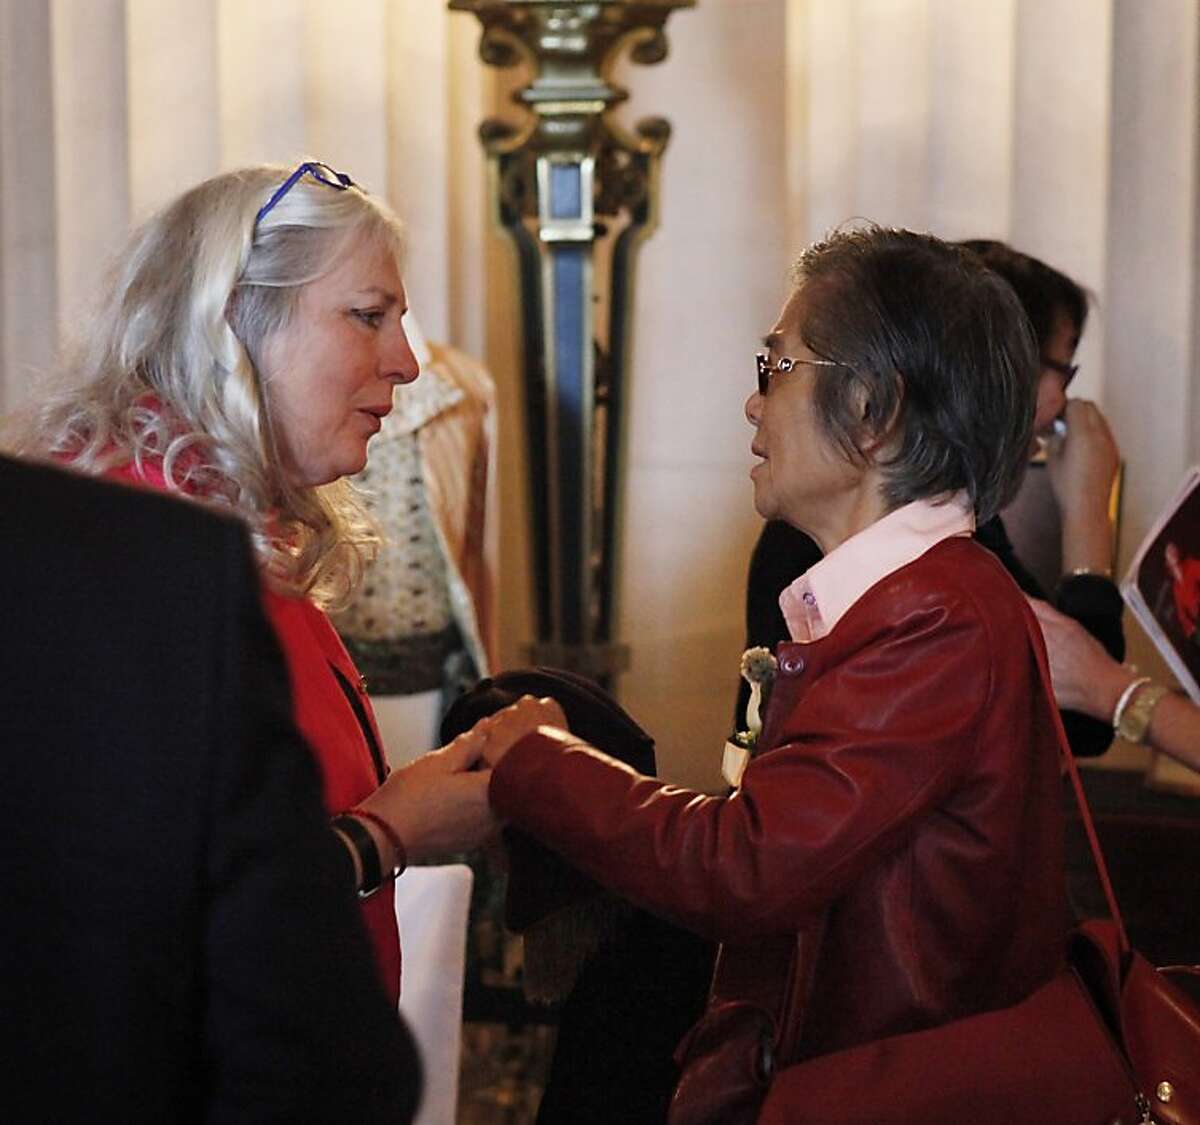 Judi Larson, Zheng Cao's sister-in-law, speaks with Xiaojiao Huang, Zheng Cao's mother, at the War Memorial Opera House for a memorial concert for Cao on Monday, June 24, 2013, in San Francisco, Calif. The Chinese-born mezzo soprano died this year after a long struggle with cancer.